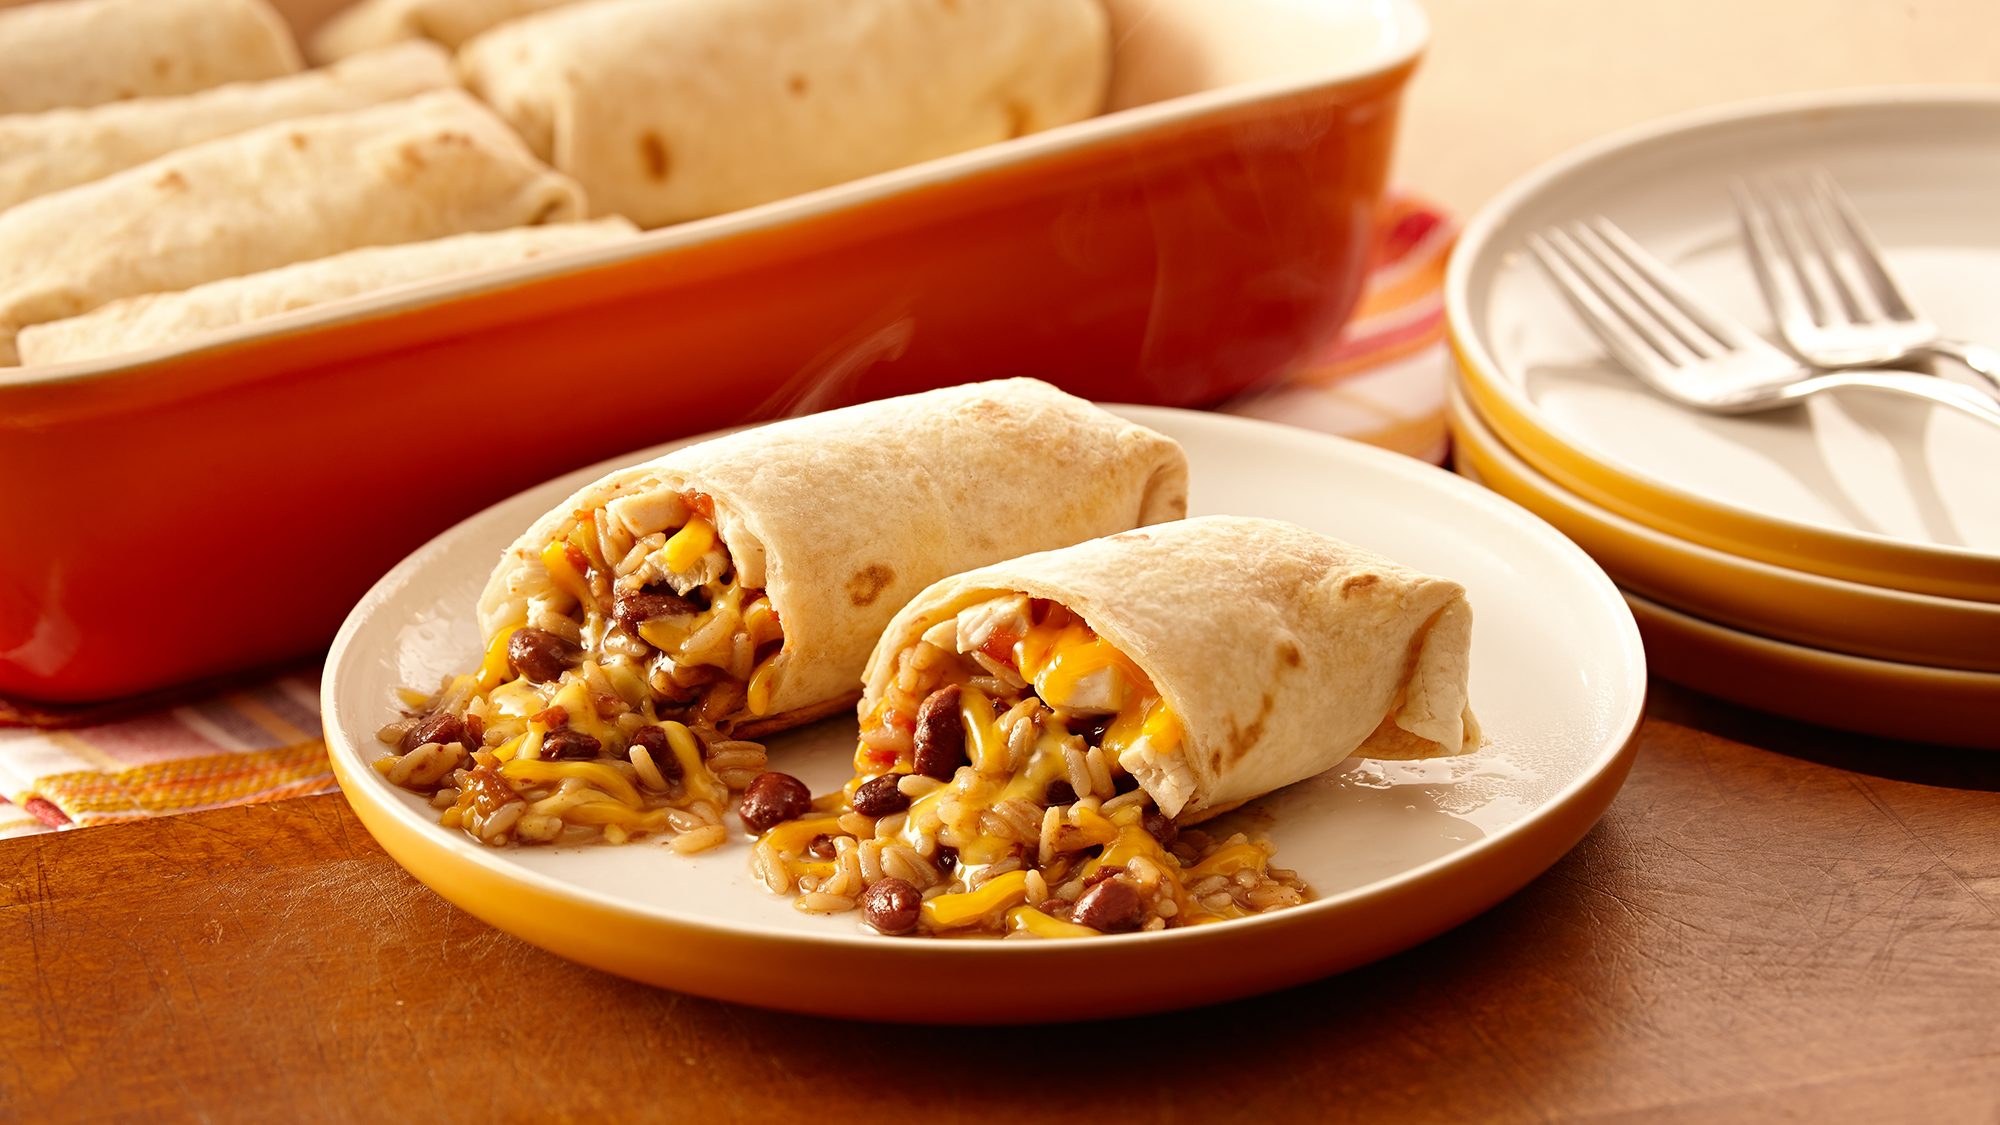 Burritos Wallpapers High Quality | Download Free